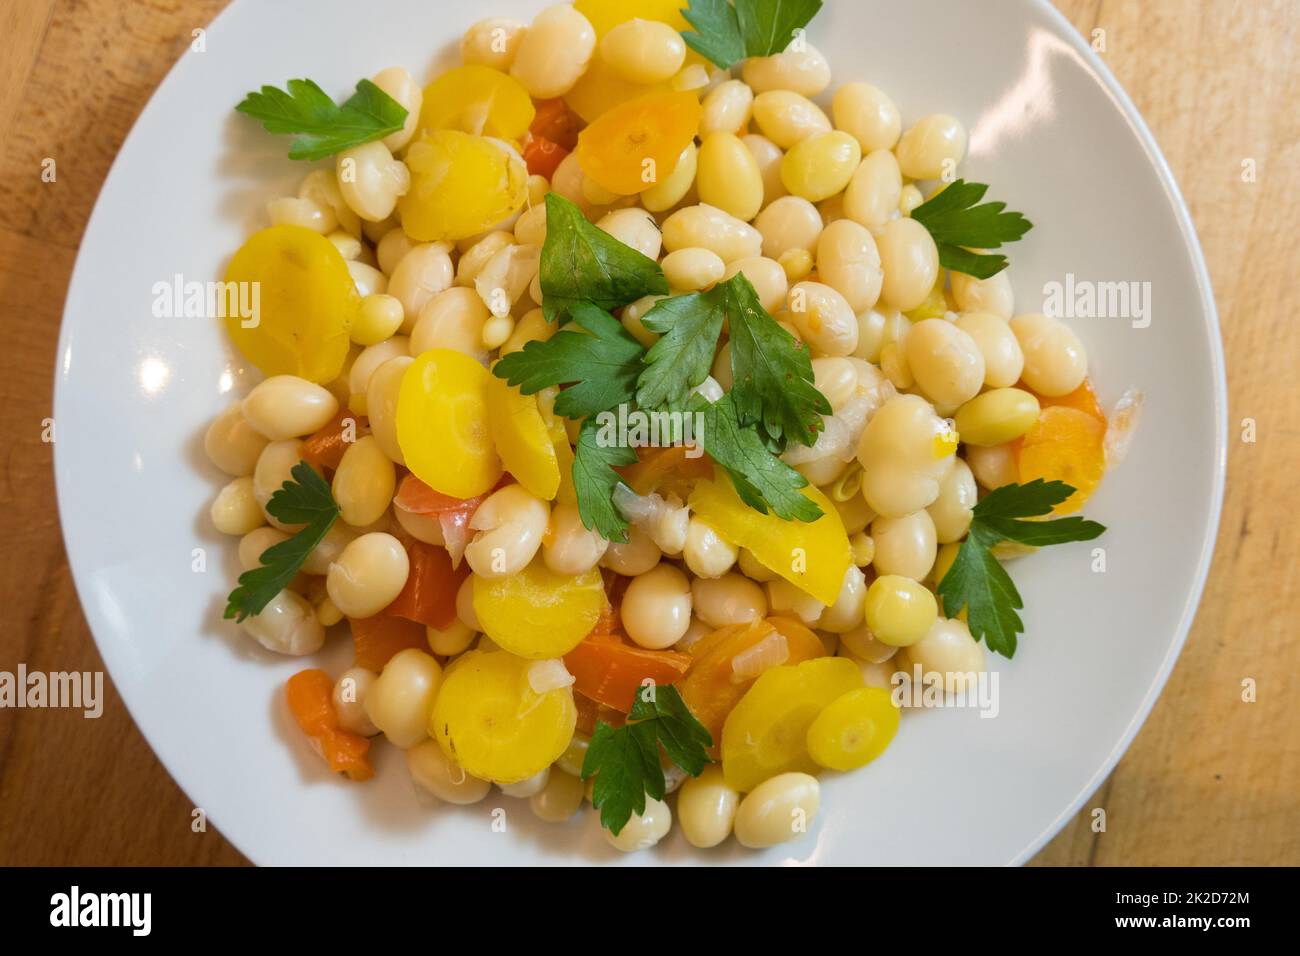 Coco de Paimpol beans in the plate Stock Photo